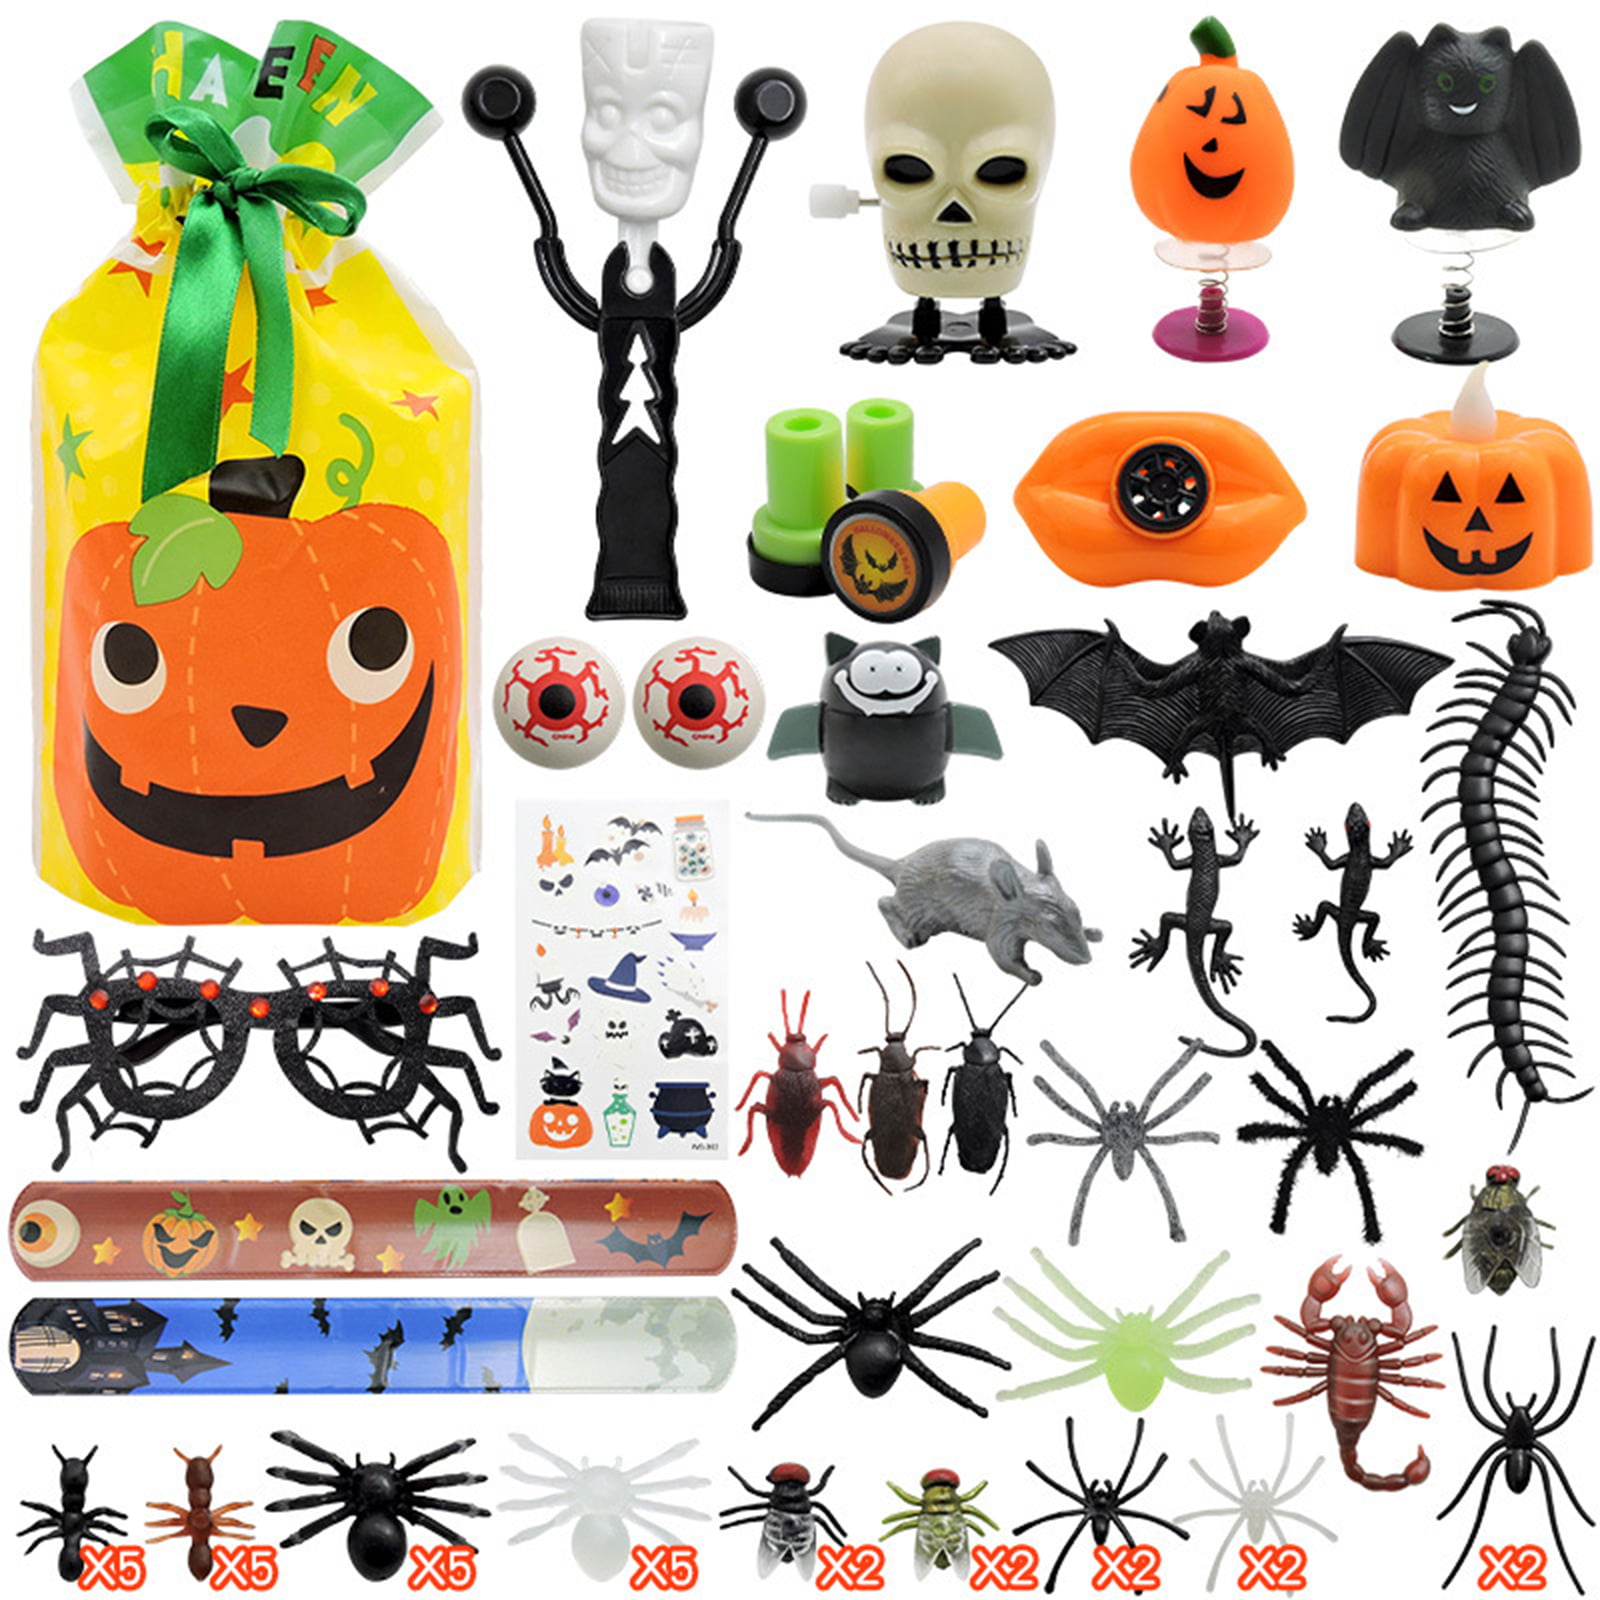 WALL WALKING SPIDER BOYS TOY GADGET FUN GIFT PRESENT BIRTHDAY PARTY BAG FILLER 